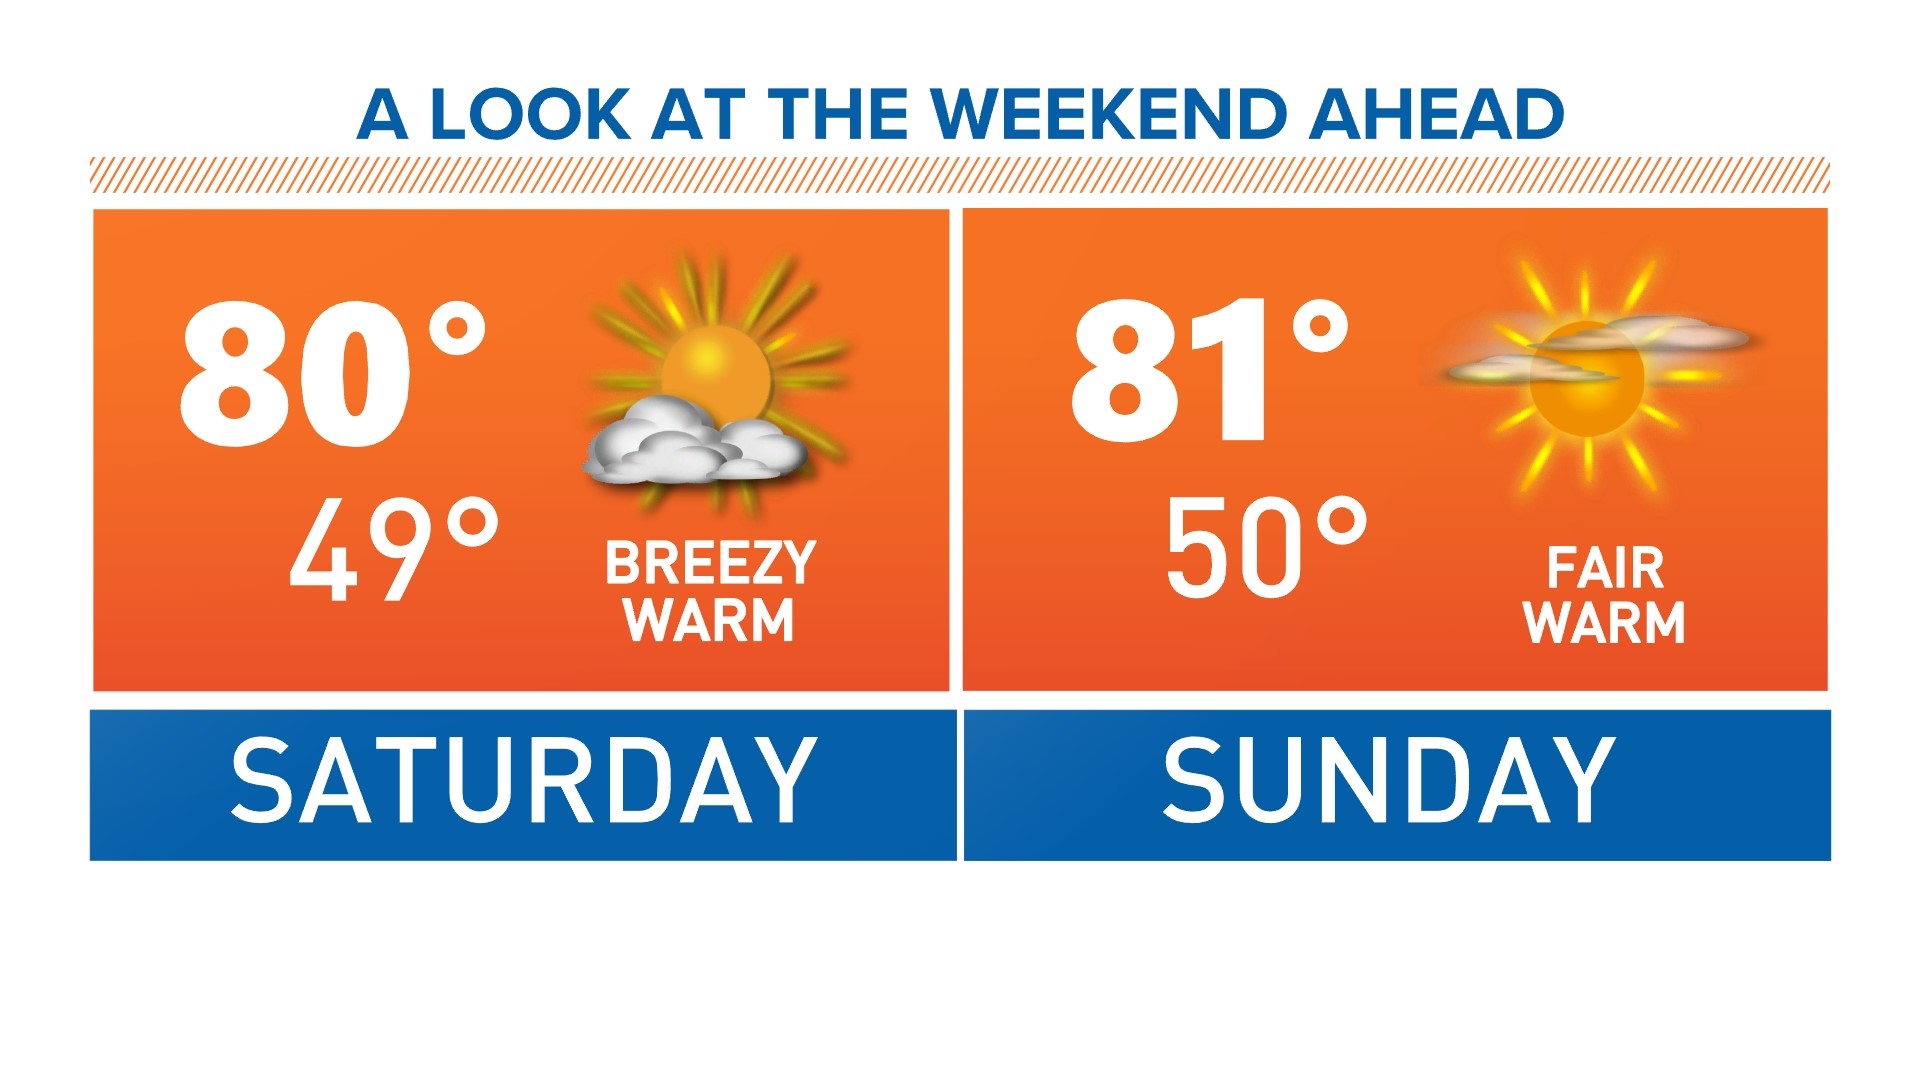 Here's a quick look at what you can expect this weekend.